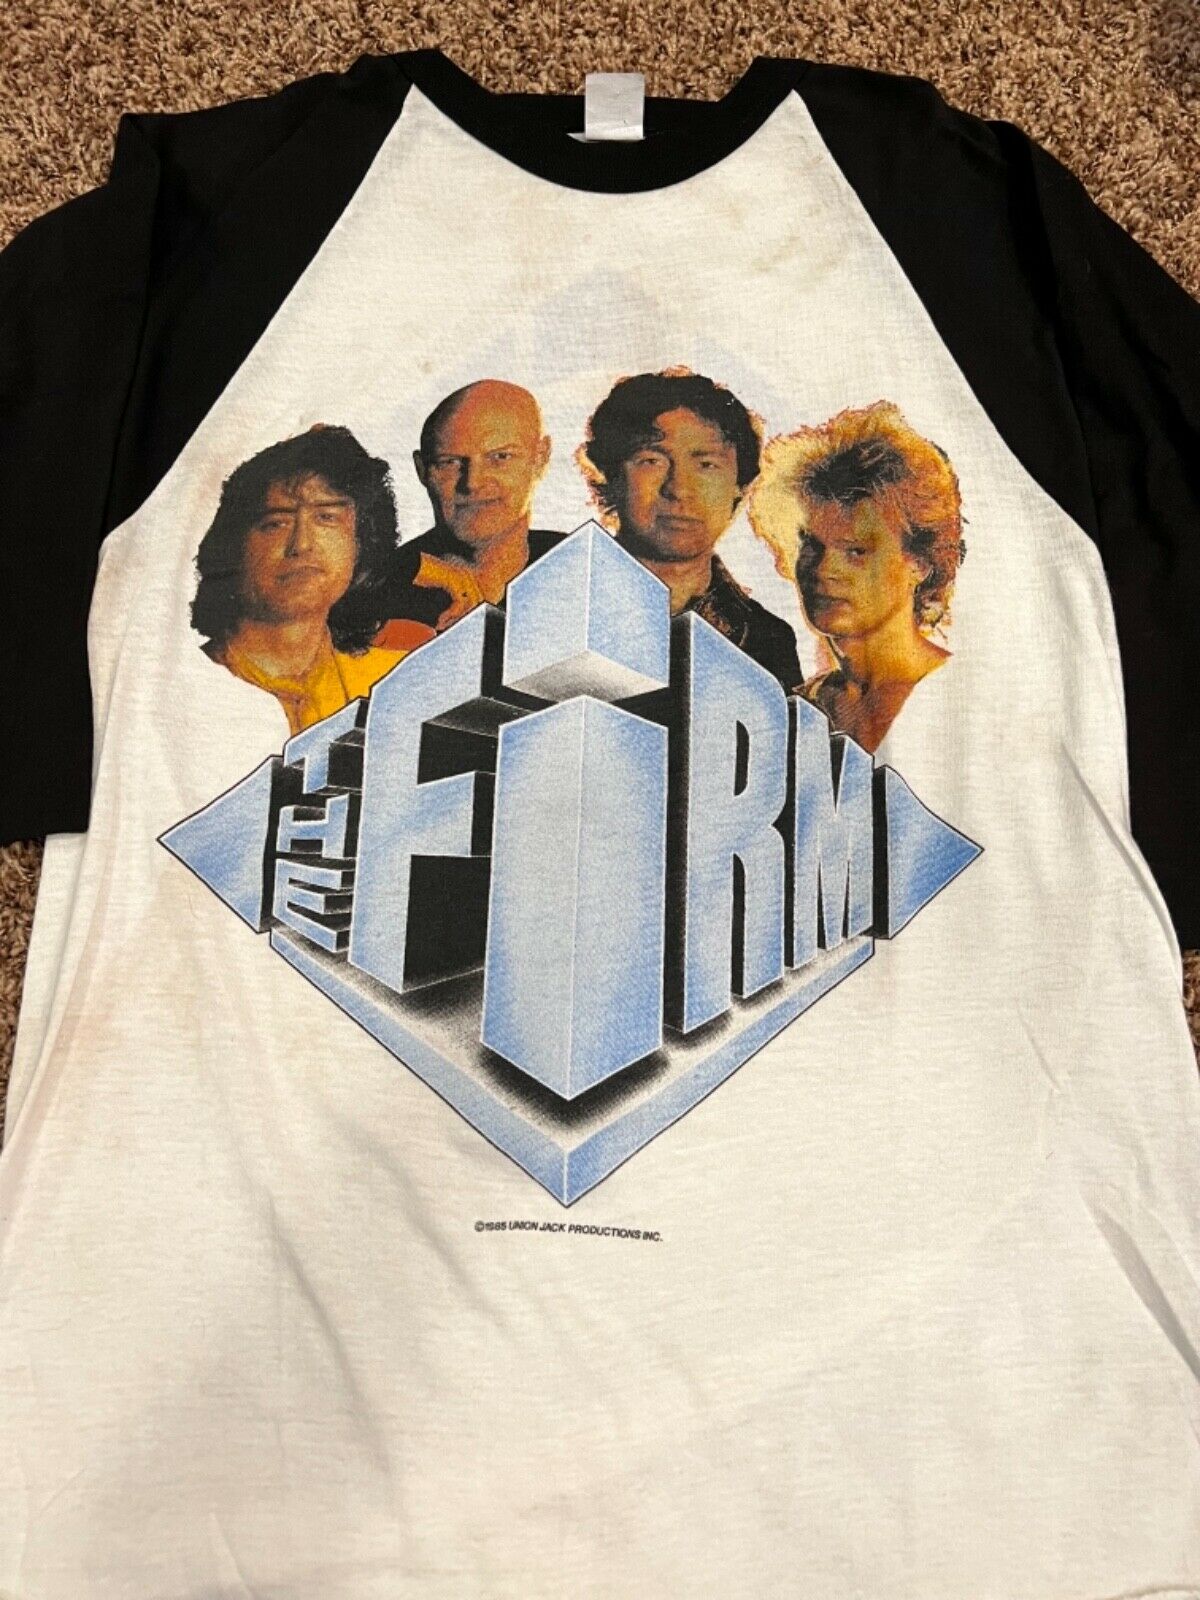 Vintage THE FIRM 1985 Concert Tour 3/4 Jersey Shirt Jimmy Page Led Zeppelin